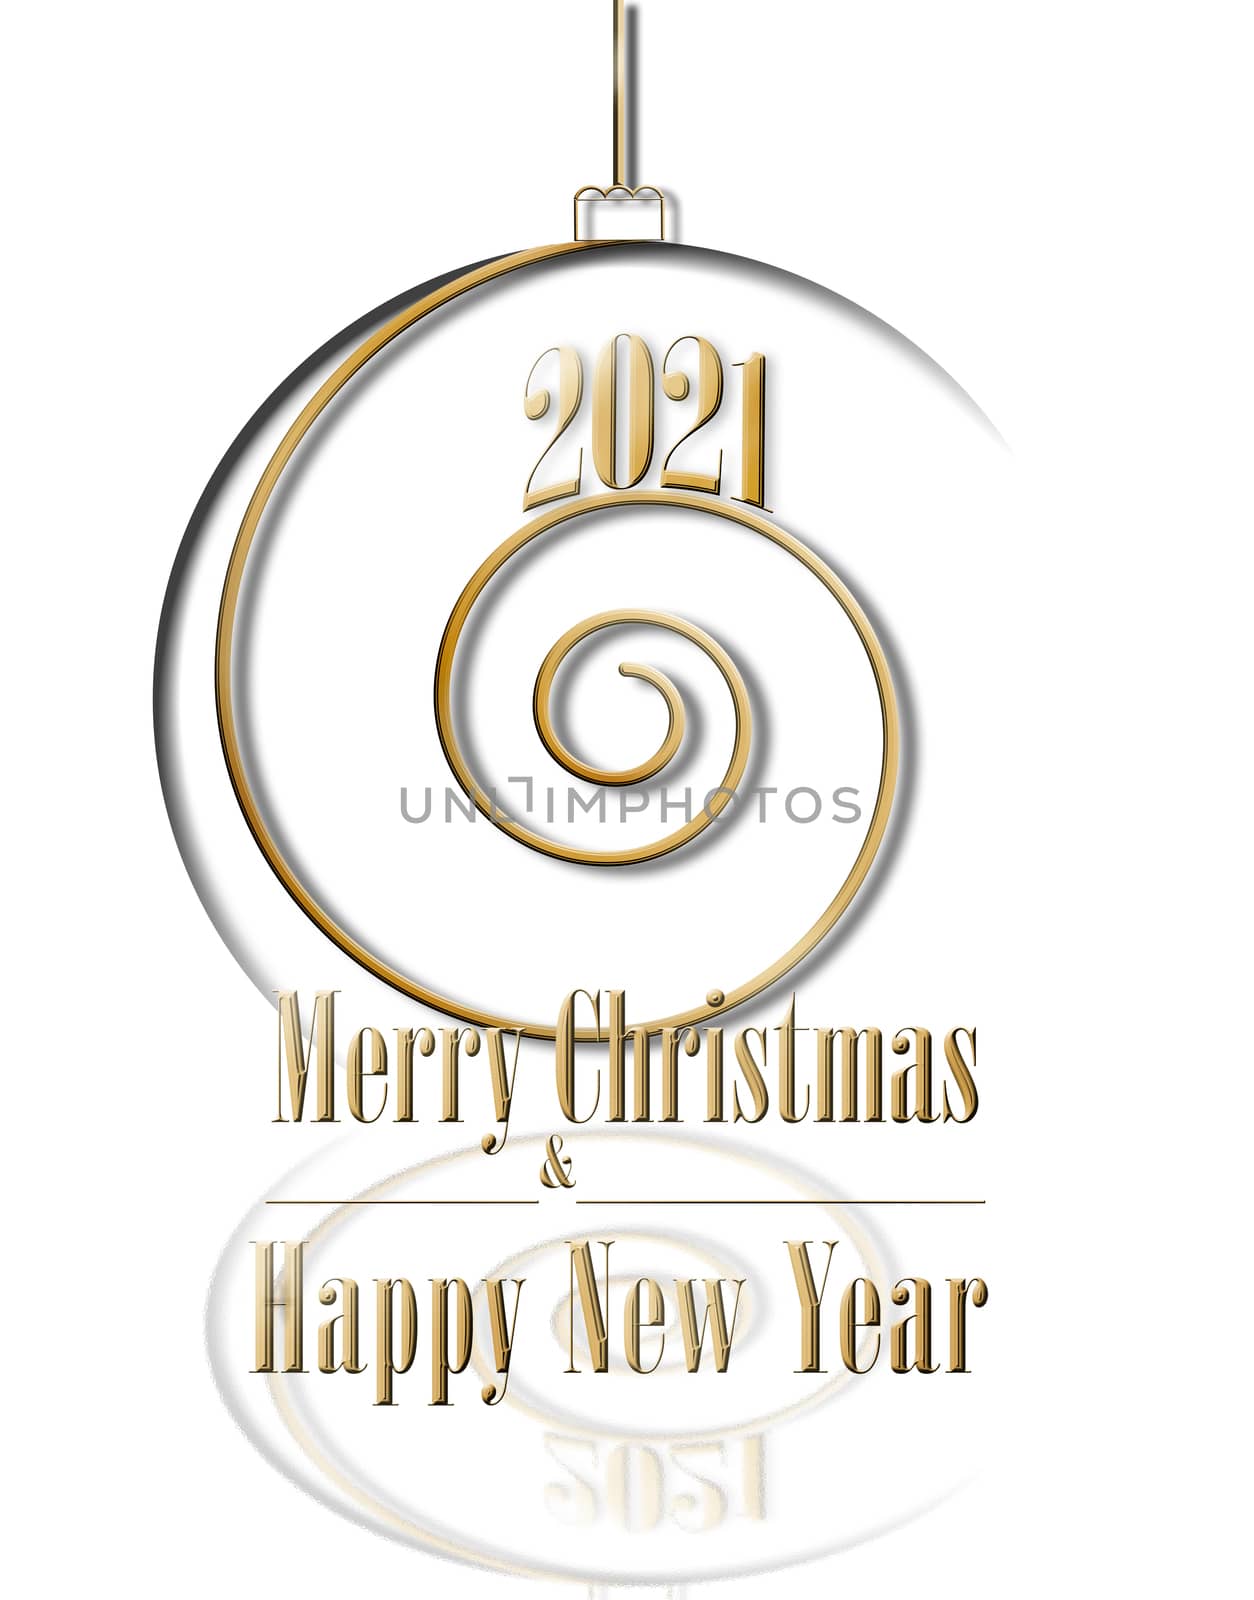 2021 Merry Christmas happy new year gold spiral shape on white background by NelliPolk